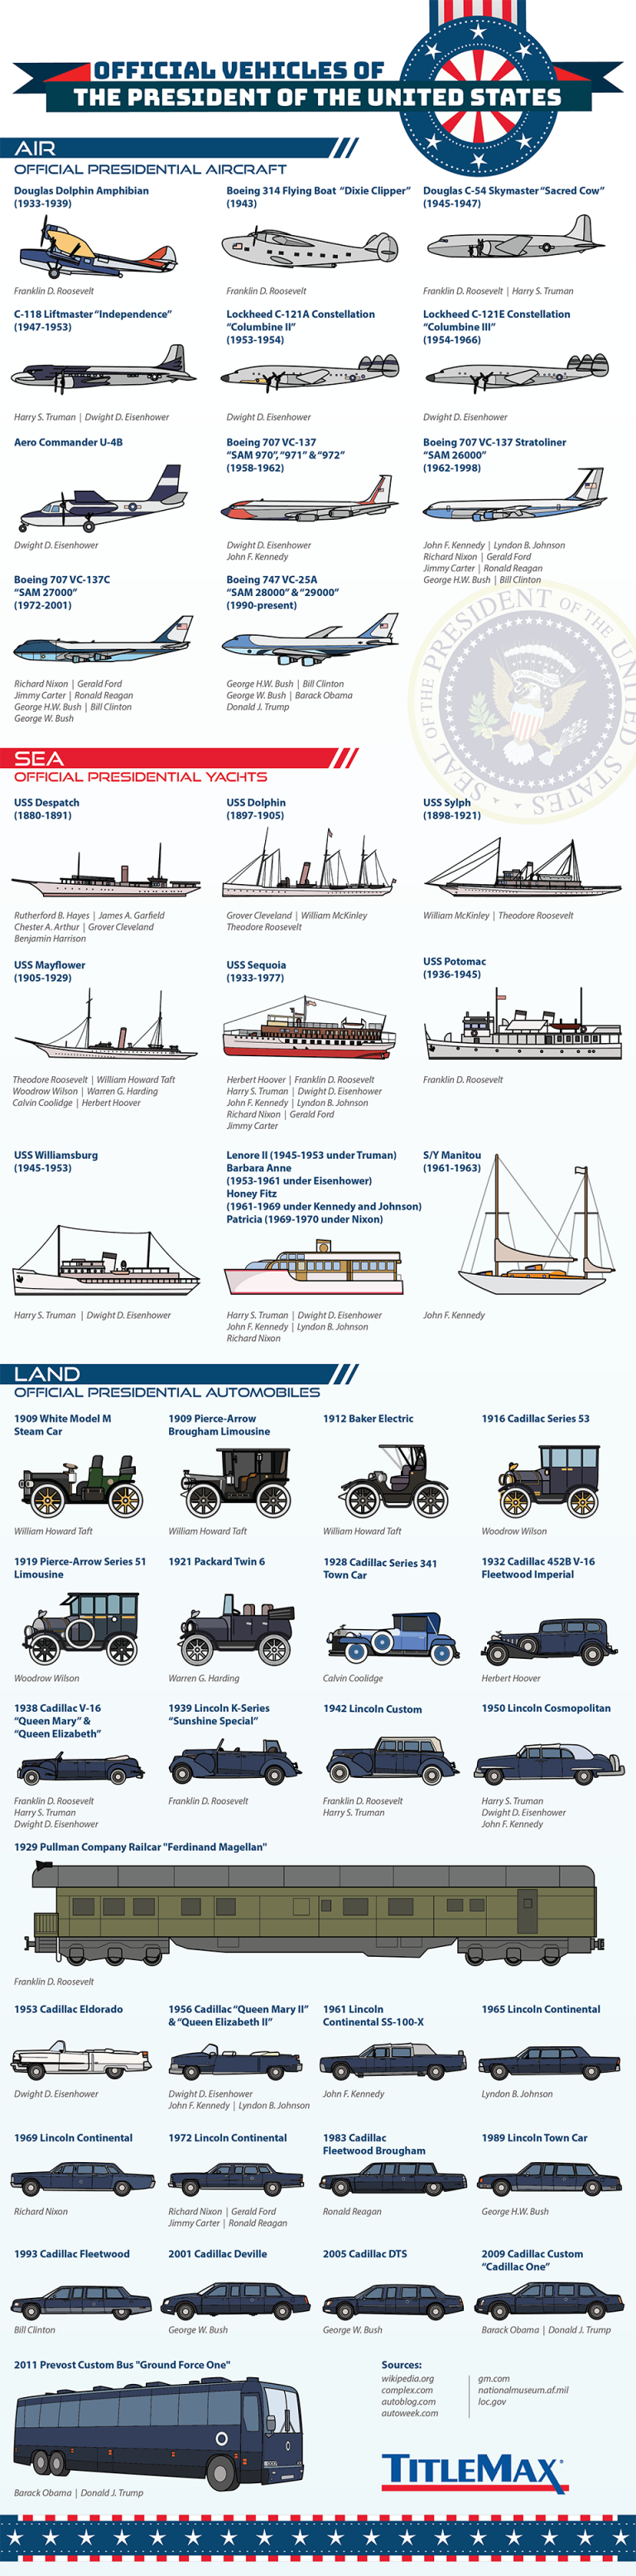 The US President's Official Vehicles